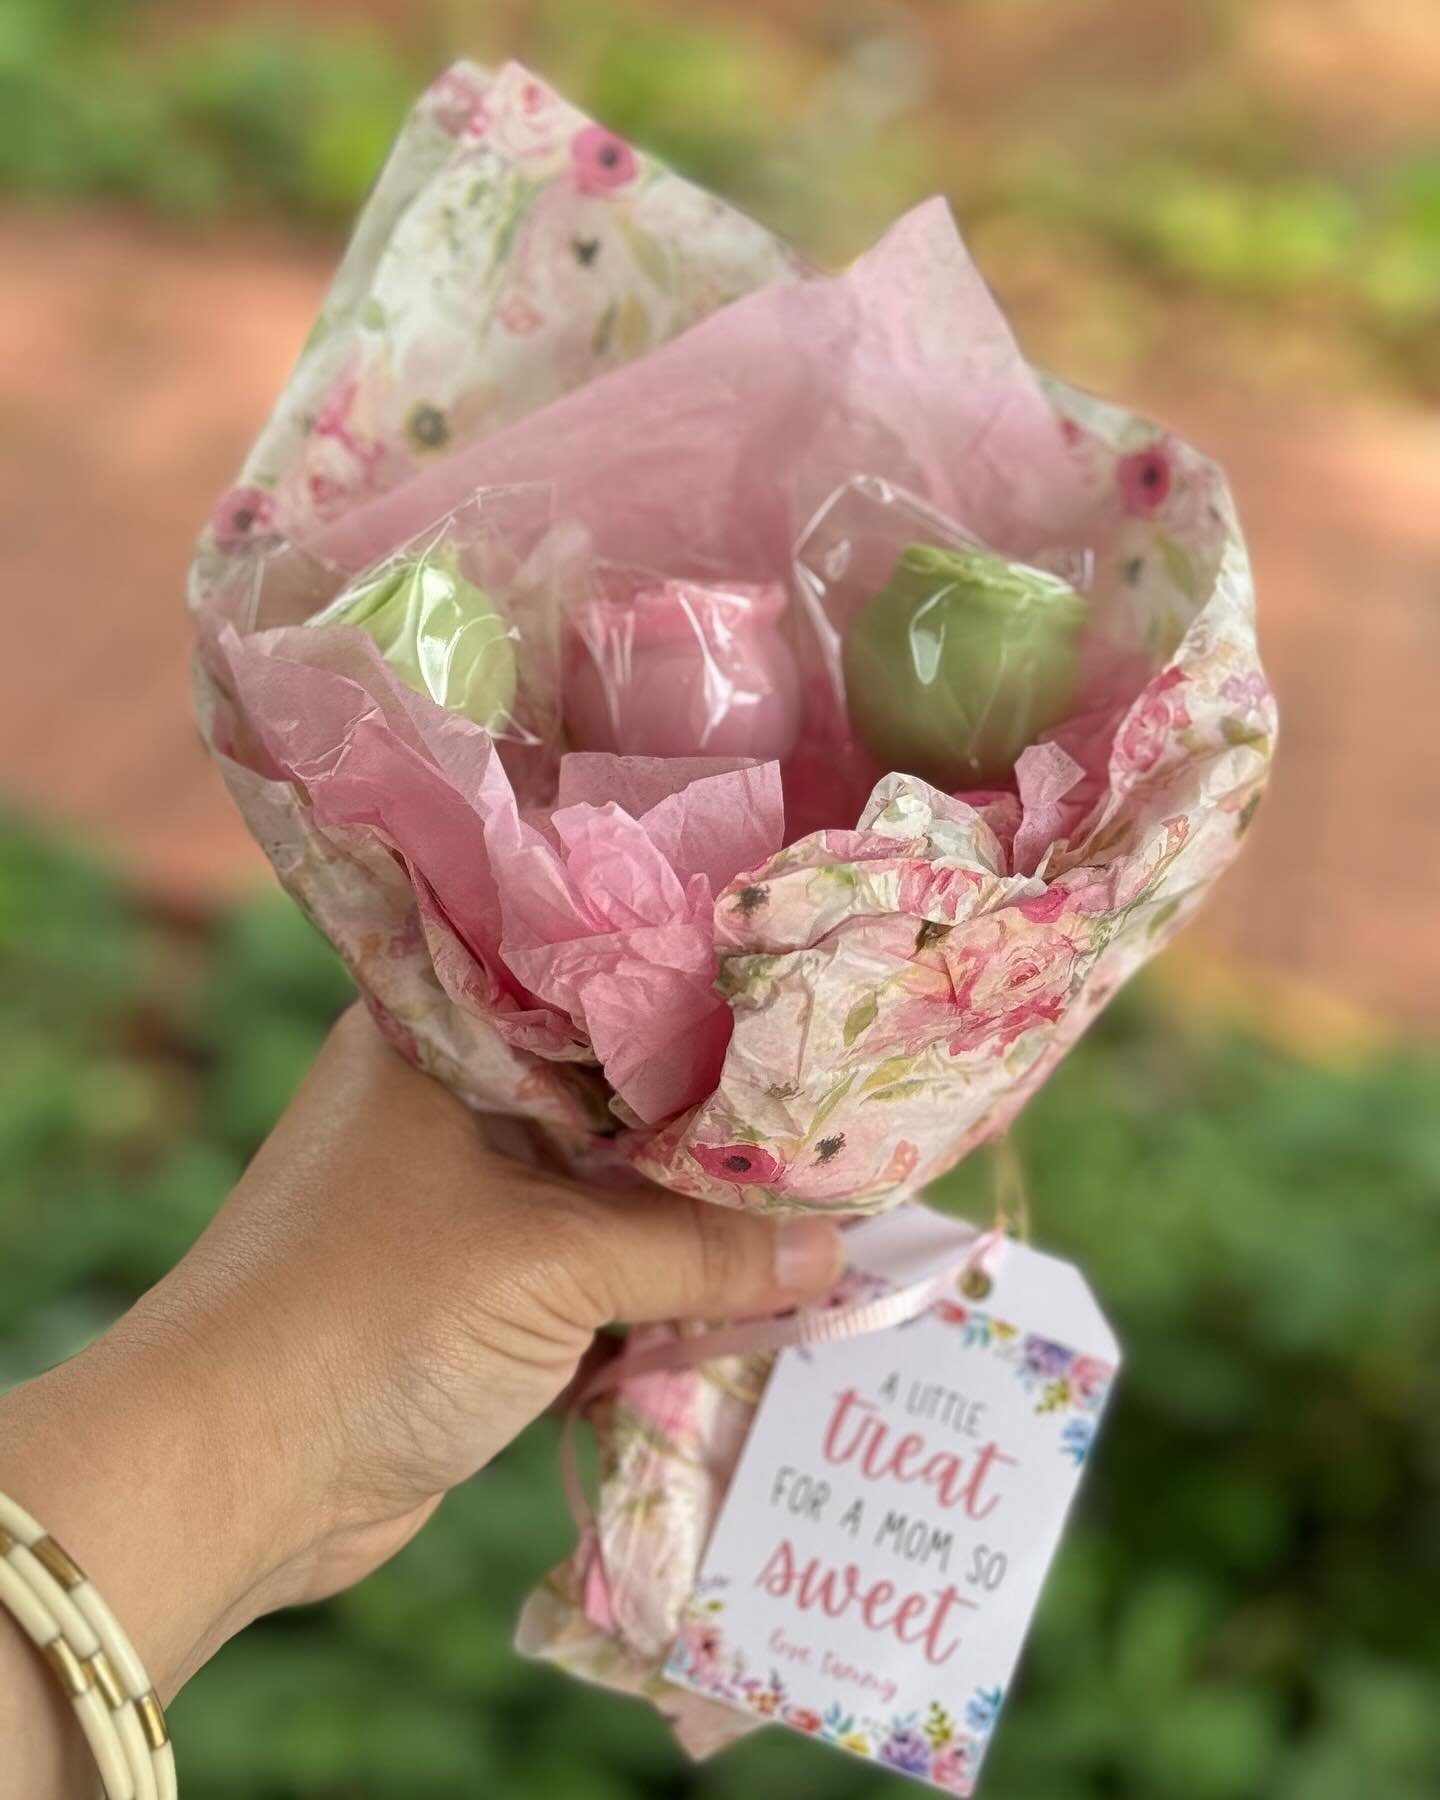 🌸A heartfelt thank you to our broker, Tammy Giles, for the adorable cake pop bouquets she gifted our team for Mother&rsquo;s Day! At Giles Realty, our agents and staff are not only dedicated professionals but also incredible moms. We&rsquo;re so gra